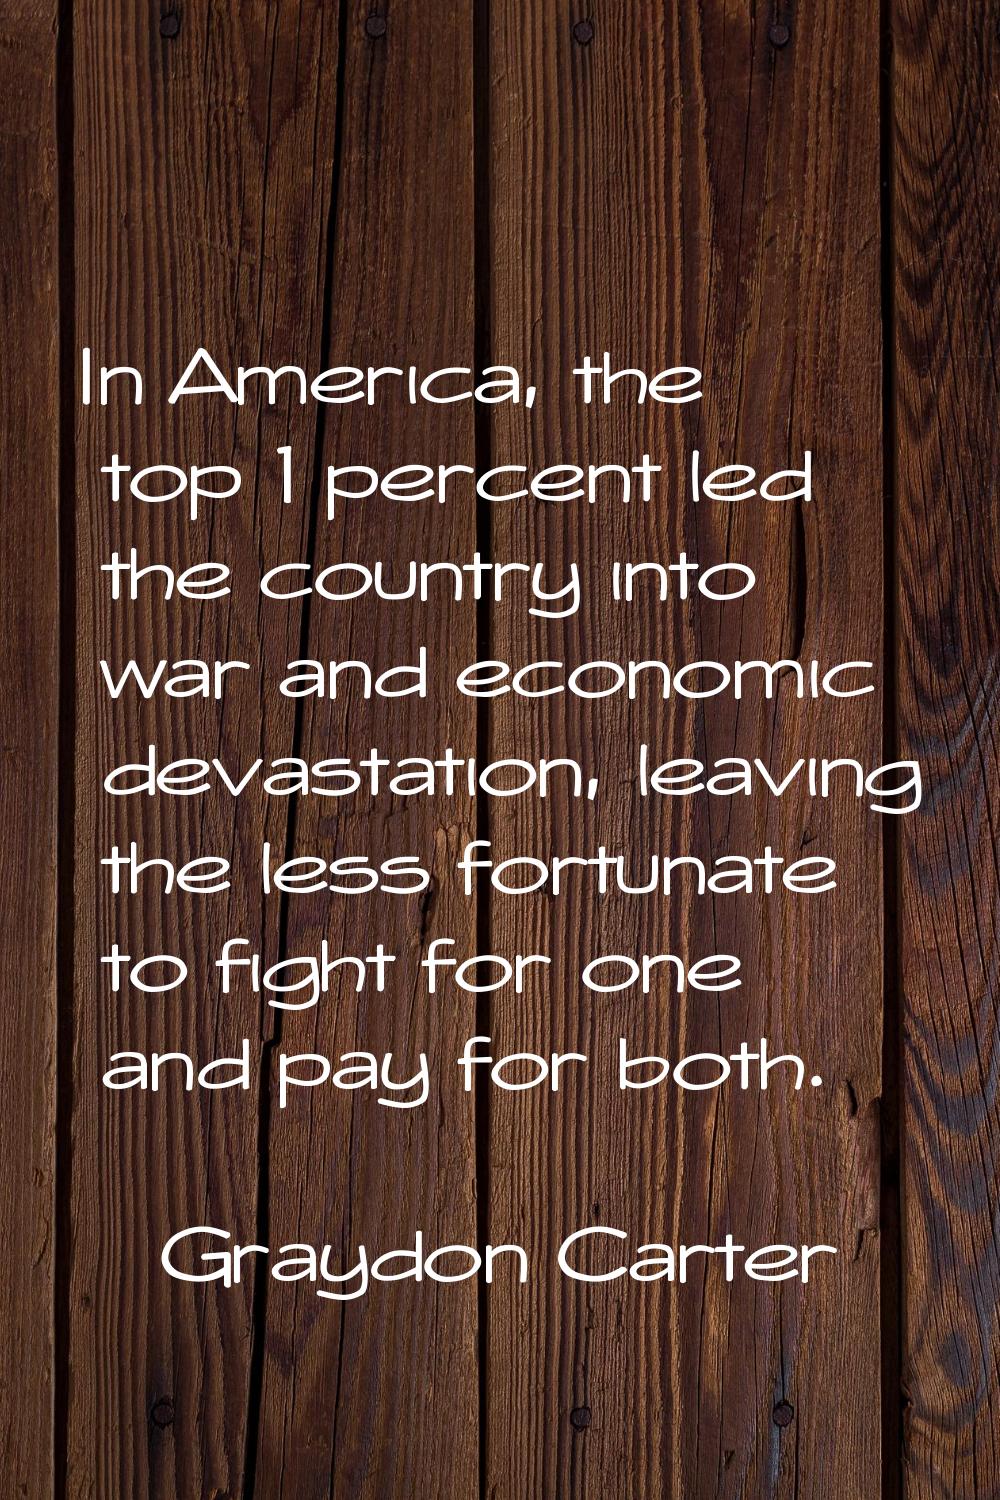 In America, the top 1 percent led the country into war and economic devastation, leaving the less f